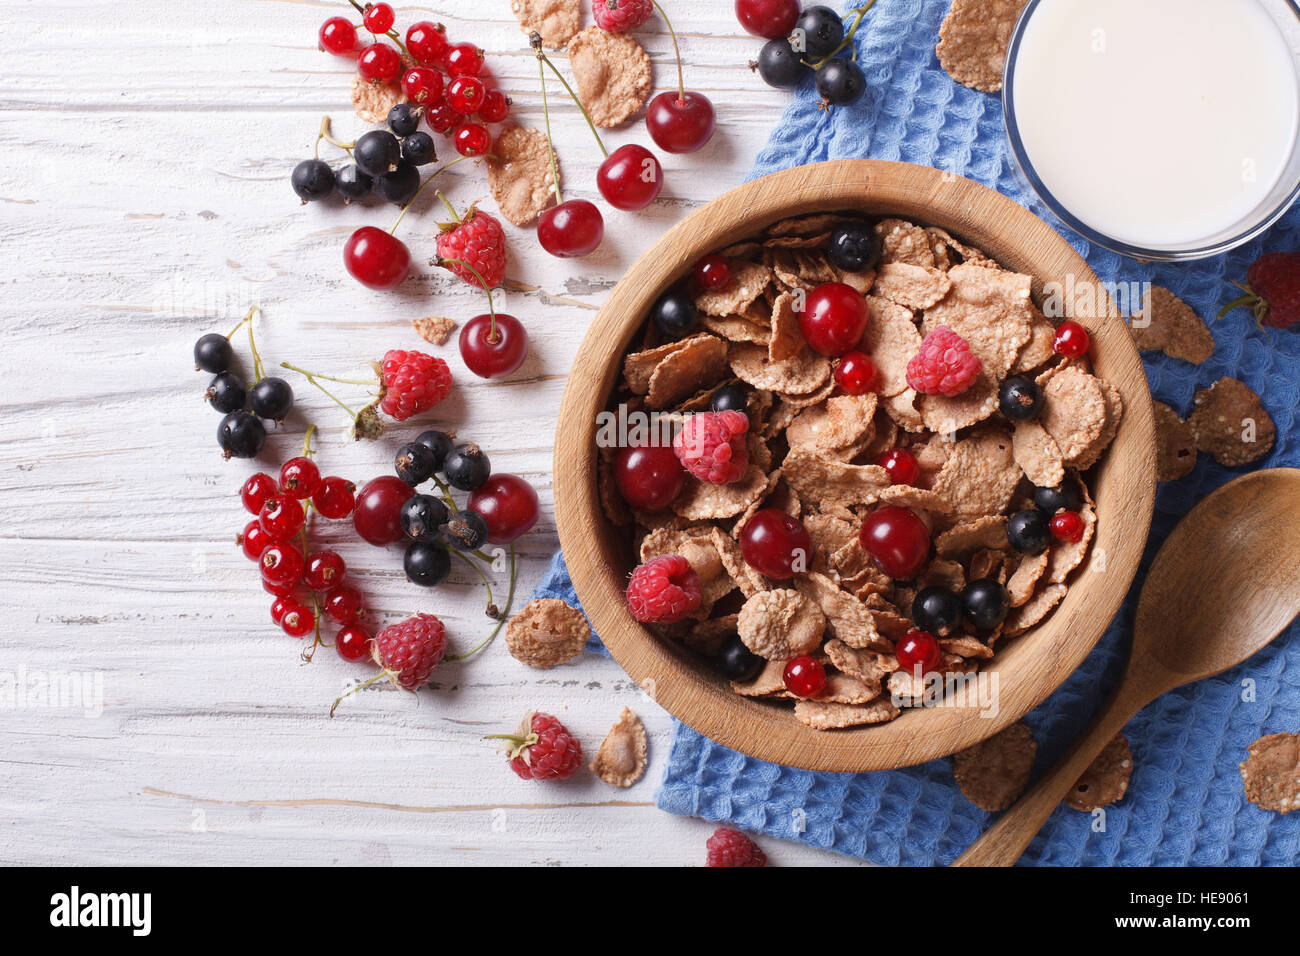 Granola with fresh berries in a wooden bowl and milk on the table. Horizontal top view Stock Photo